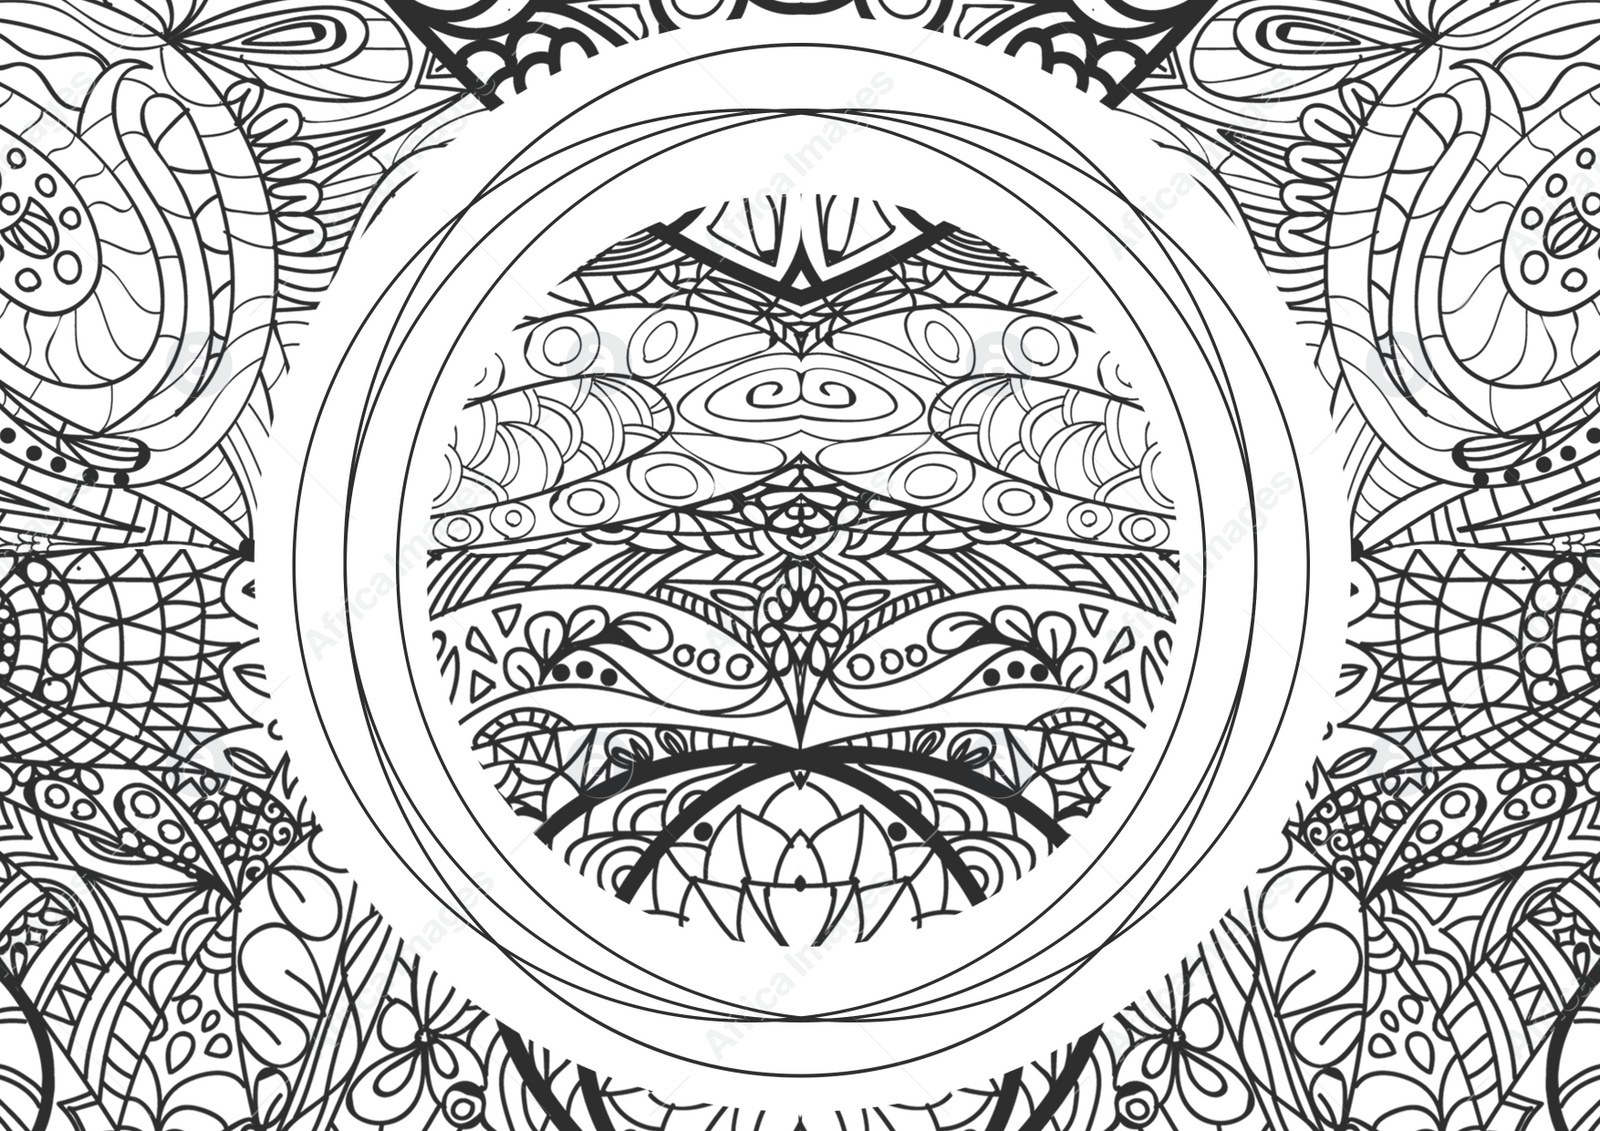 Illustration of Abstract ornaments on white background, illustration. Coloring page